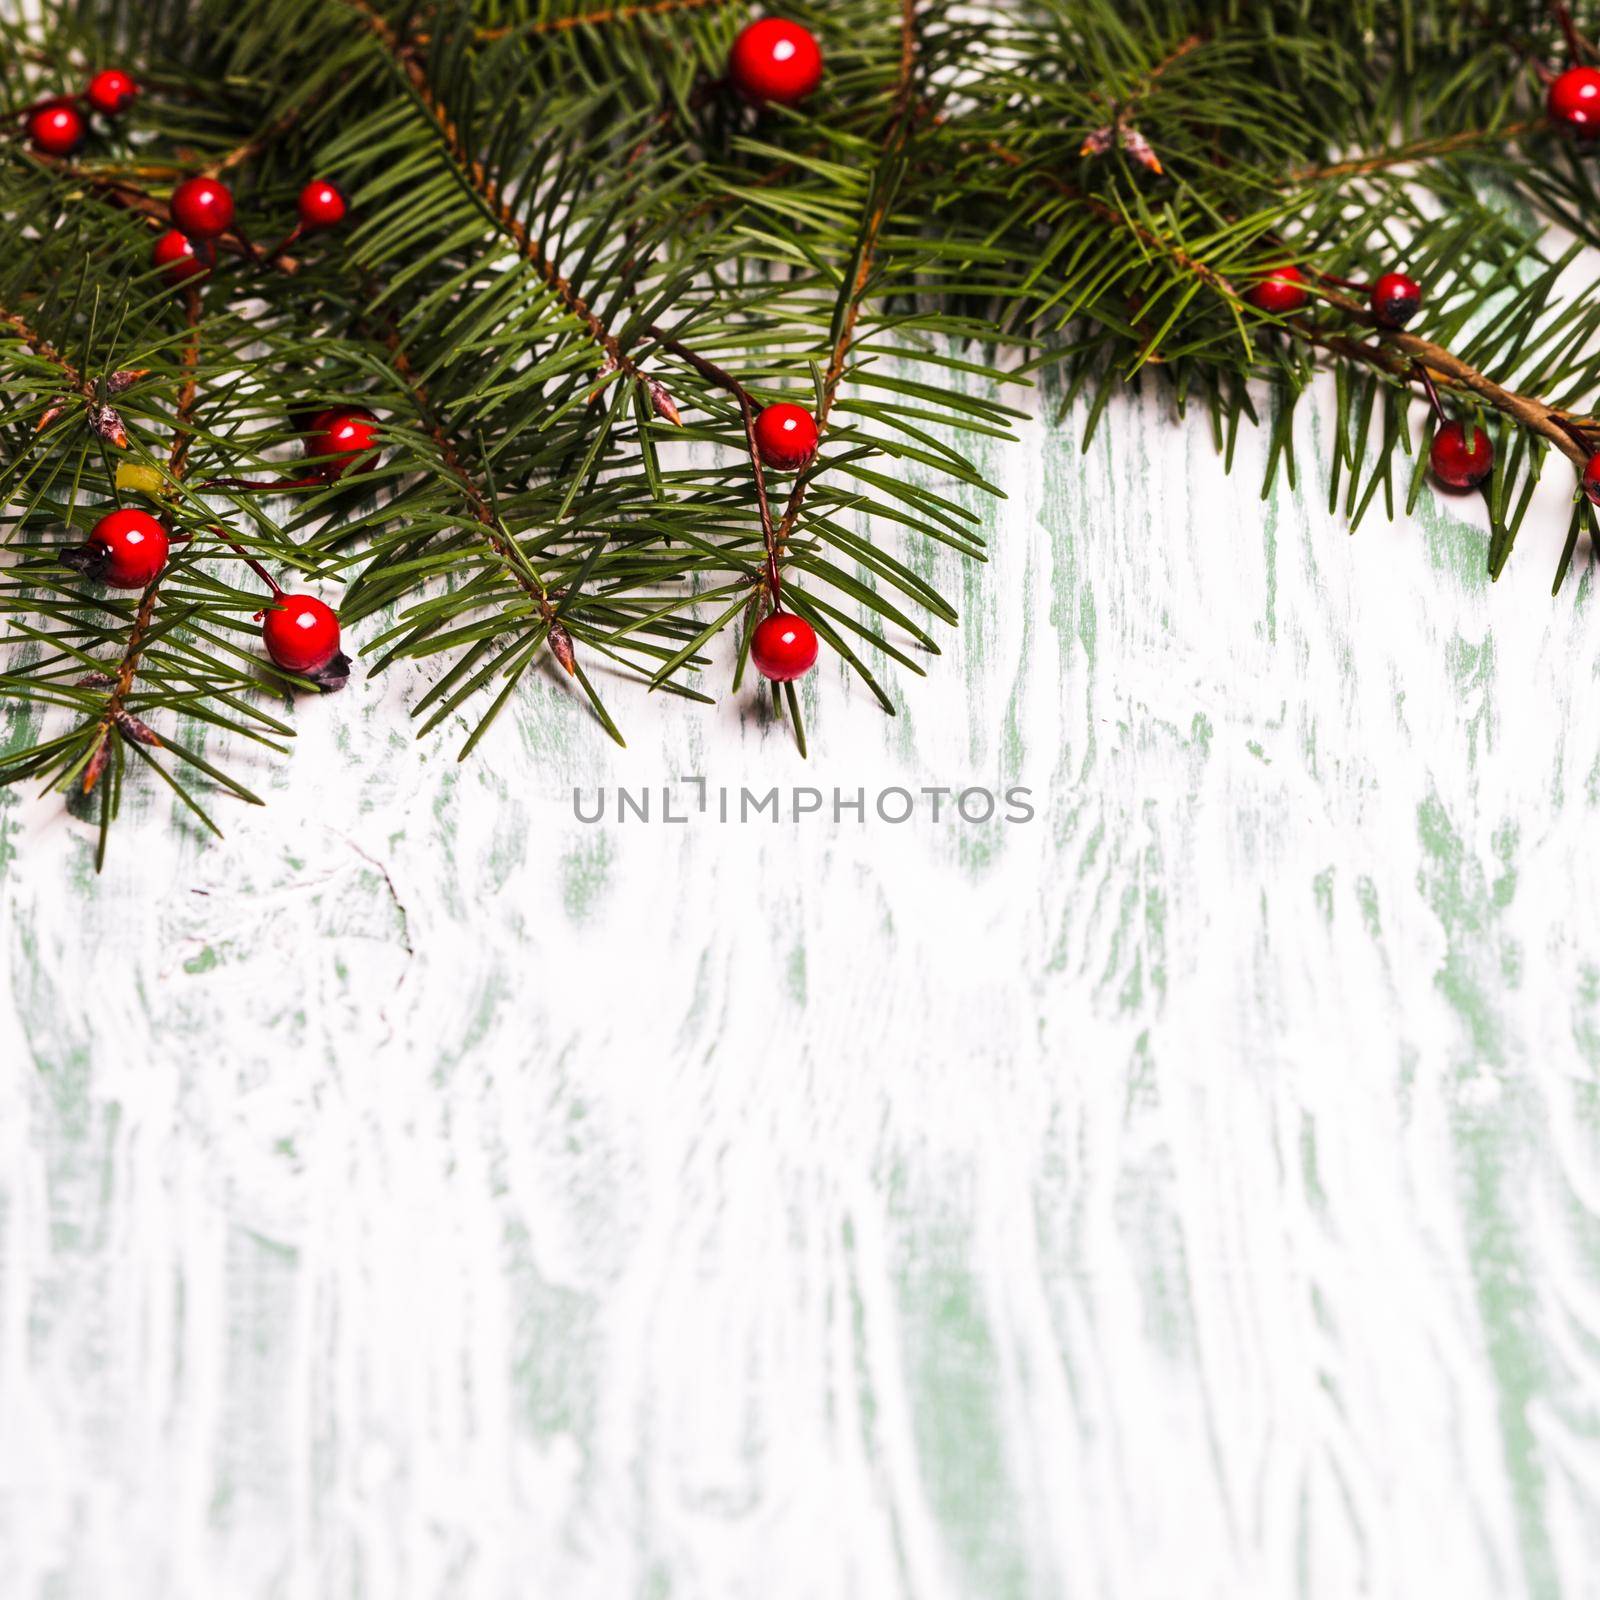 Fir brahcnes with holly berries on a wooden background. Copy text for Christmas greetings